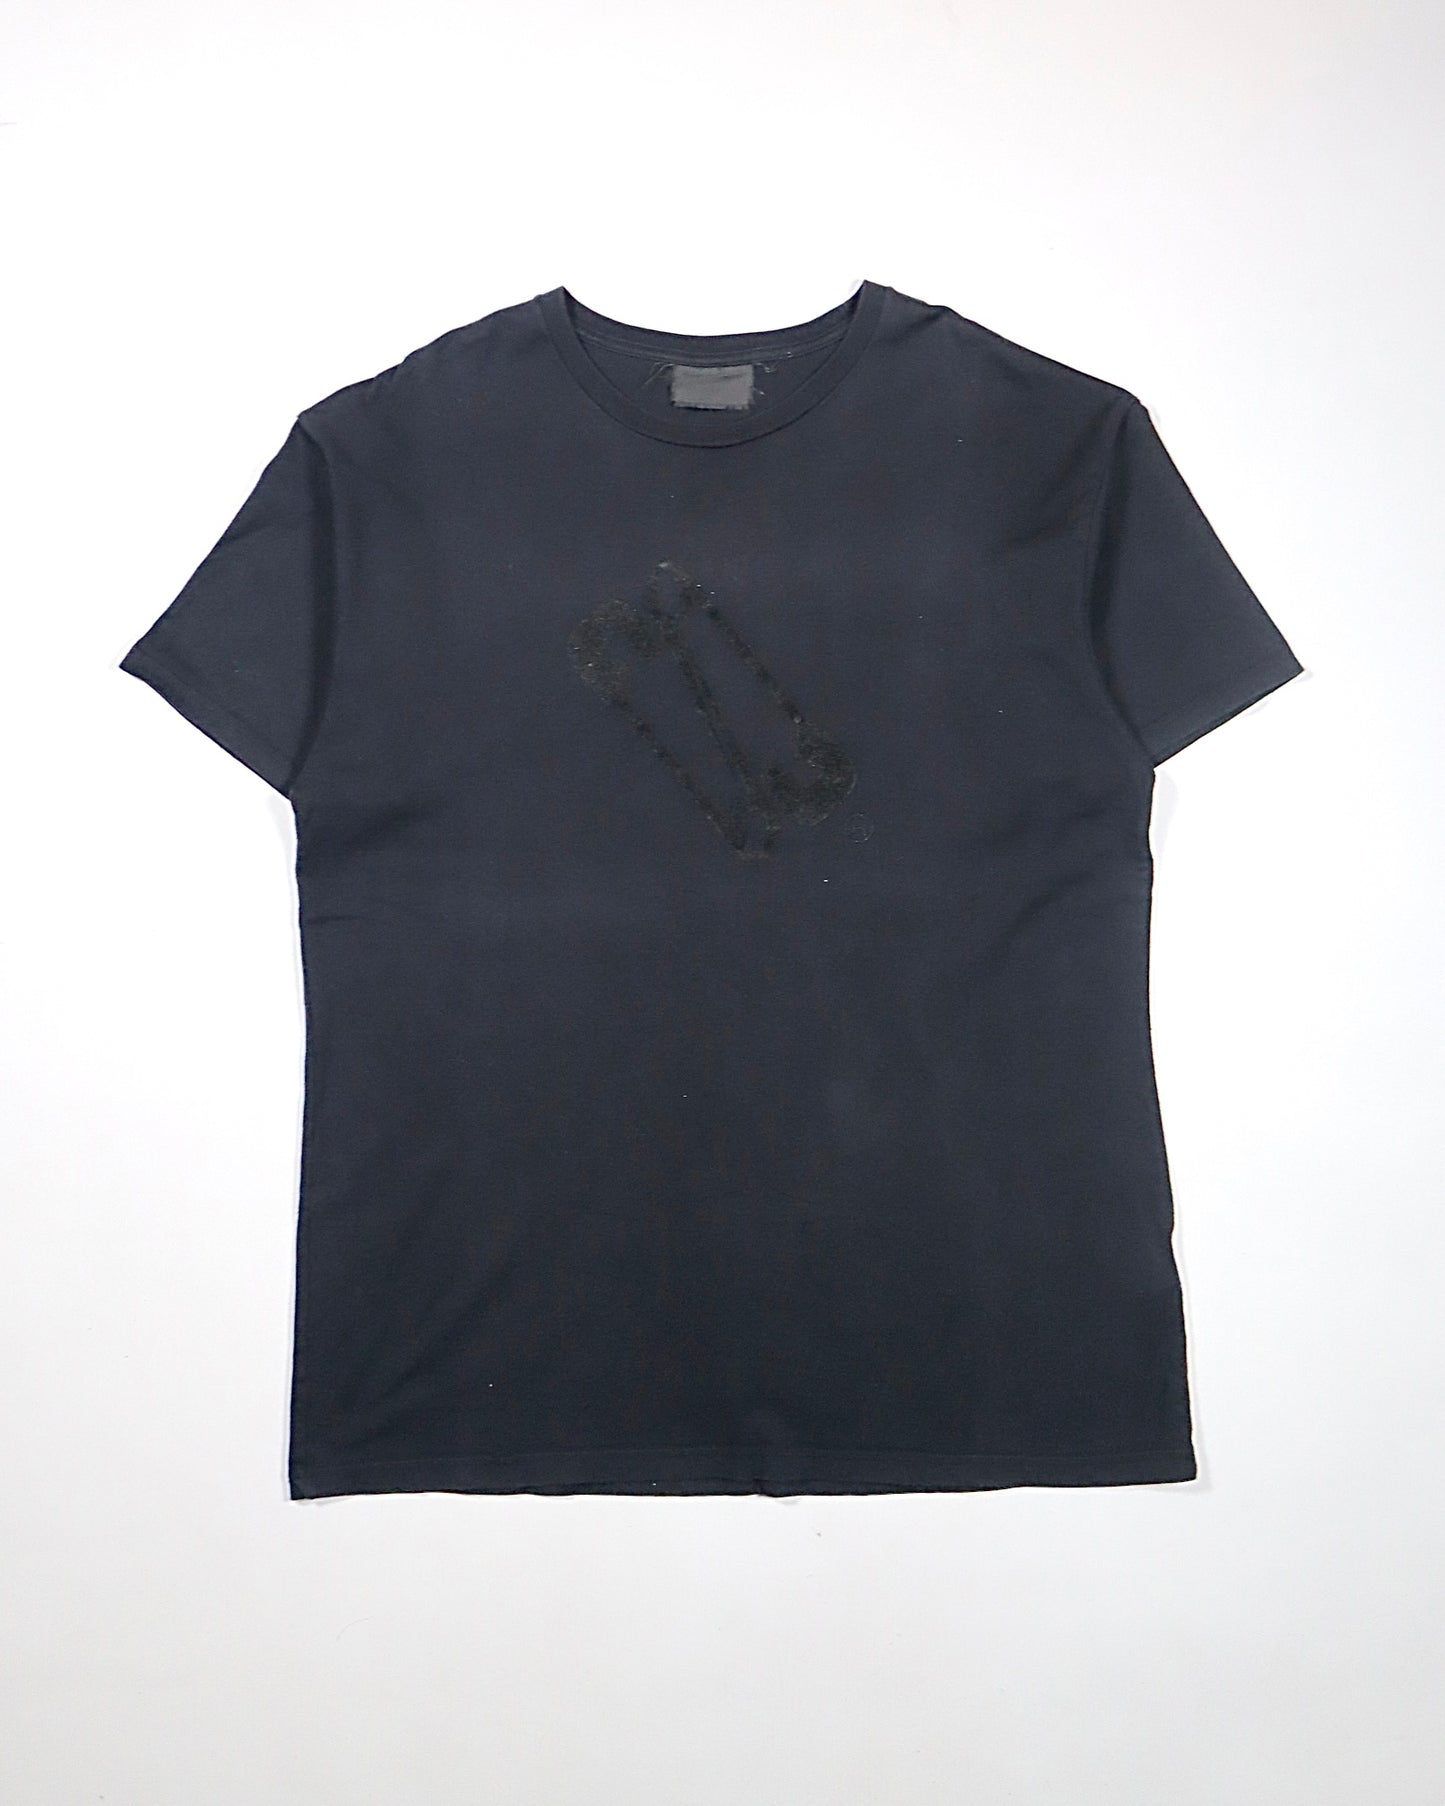 Undercover AW01 Safety Pin Tee